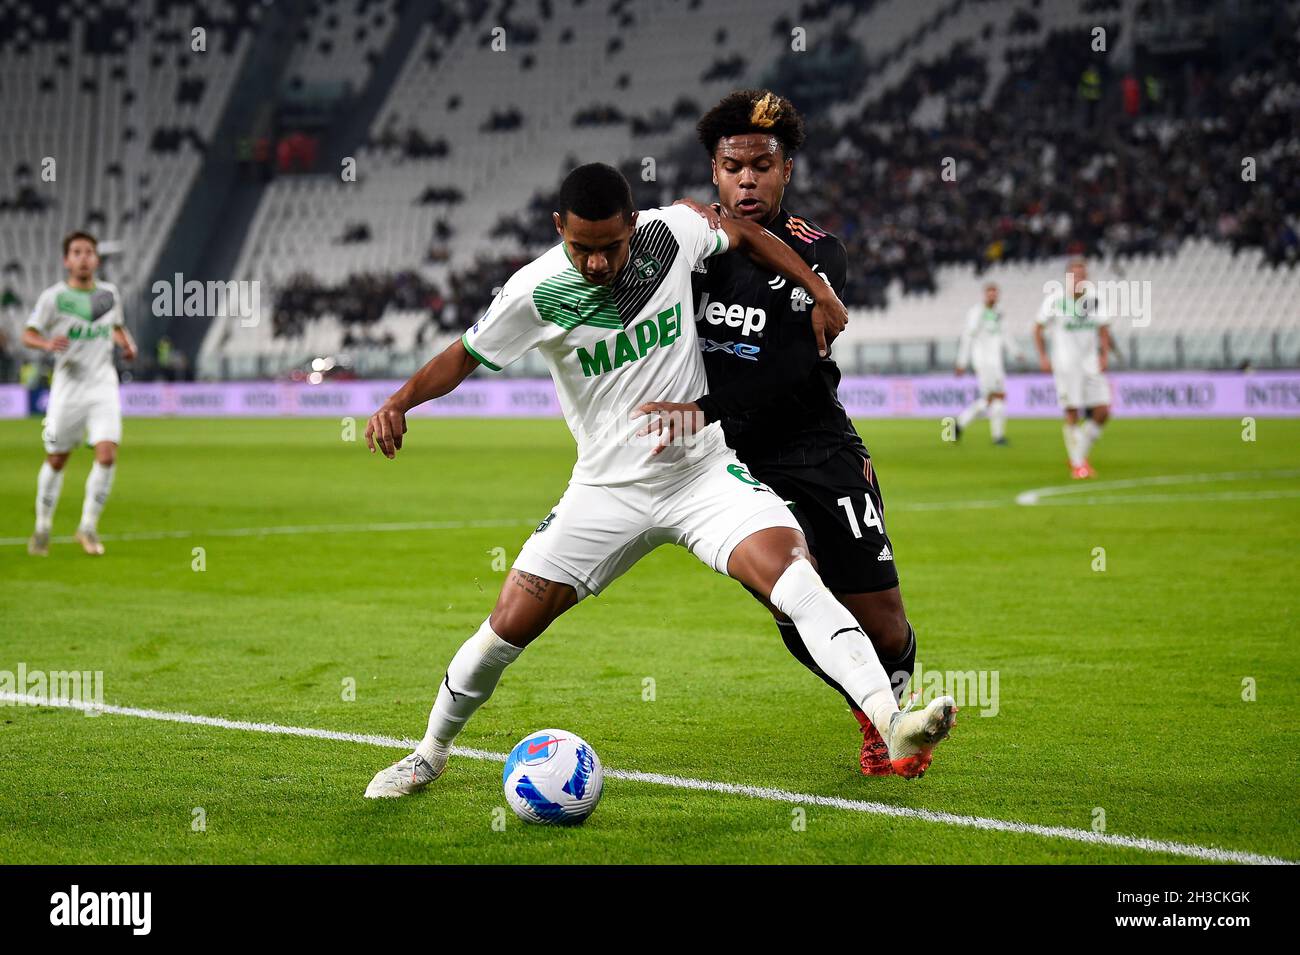 Turin, Italy. 27 October 2021. Rogerio Oliveira da Silva (L) of US Sassuolo is challenged by Weston McKennie of Juventus FC during the Serie A football match between Juventus FC and US Sassuolo. Credit: Nicolò Campo/Alamy Live News Stock Photo